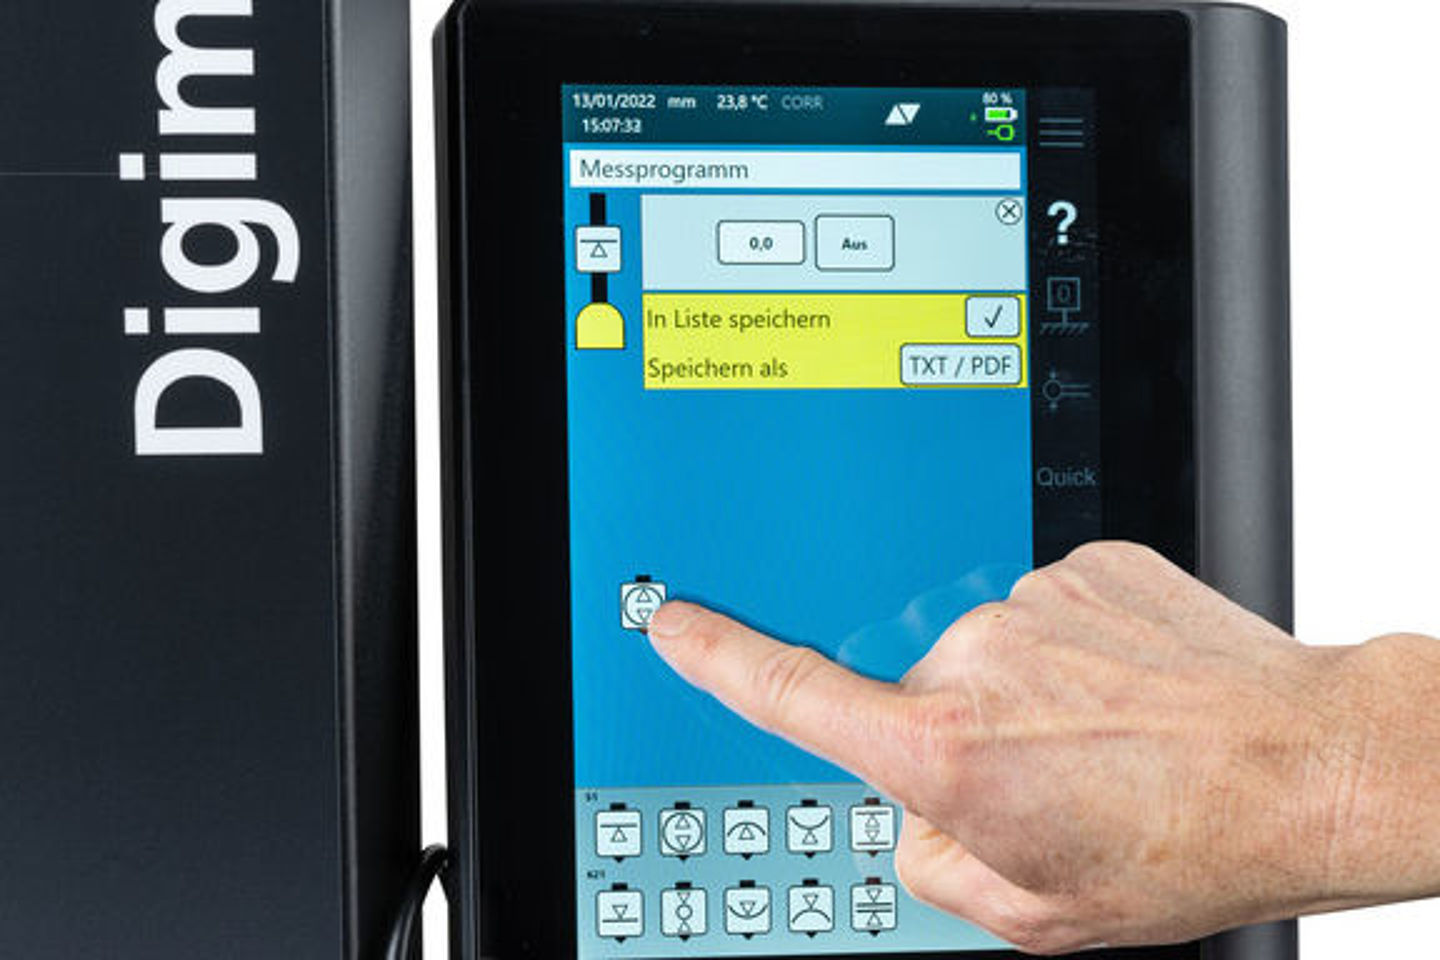 The Digimar 817 CLT is equipped with a touch screen. 